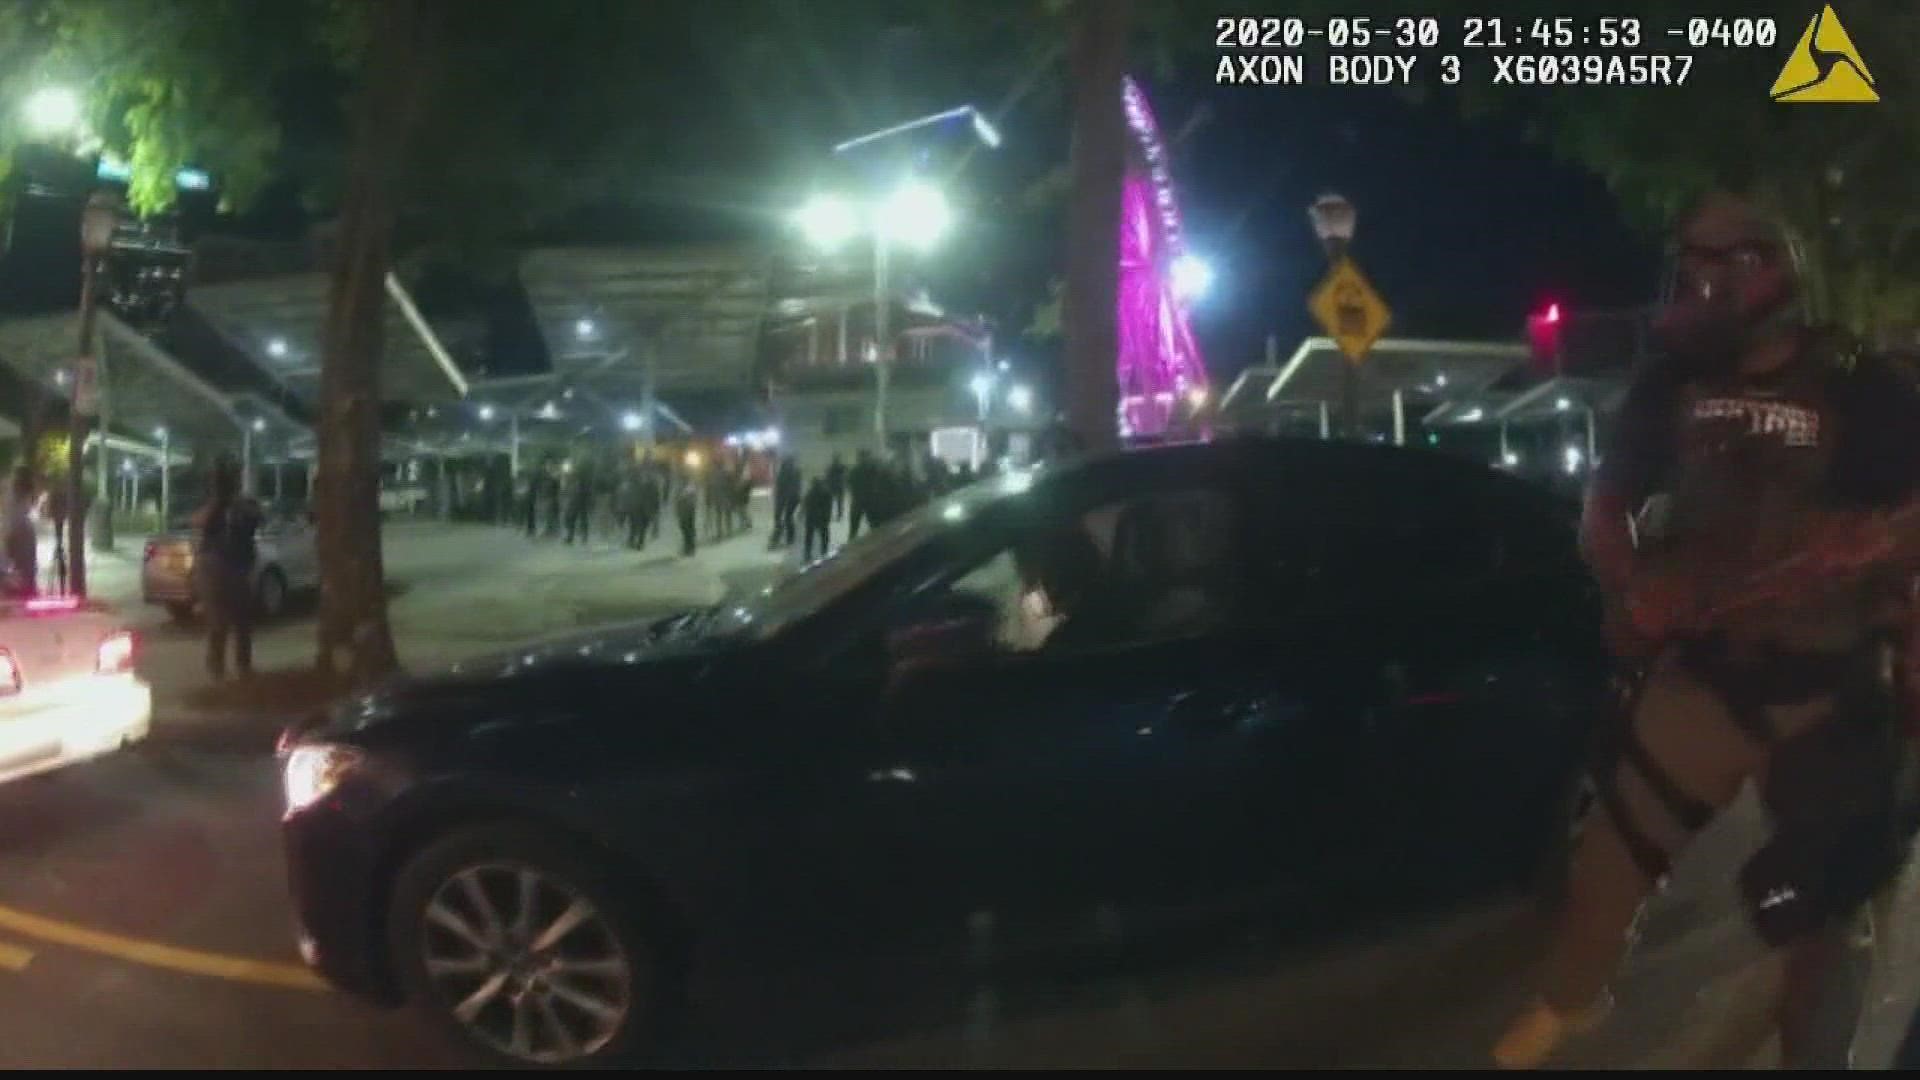 Attorneys for Taniyah Pilgrim and Messiah Young said they were dragged out of a car and tased by officers during protests in downtown Atlanta.